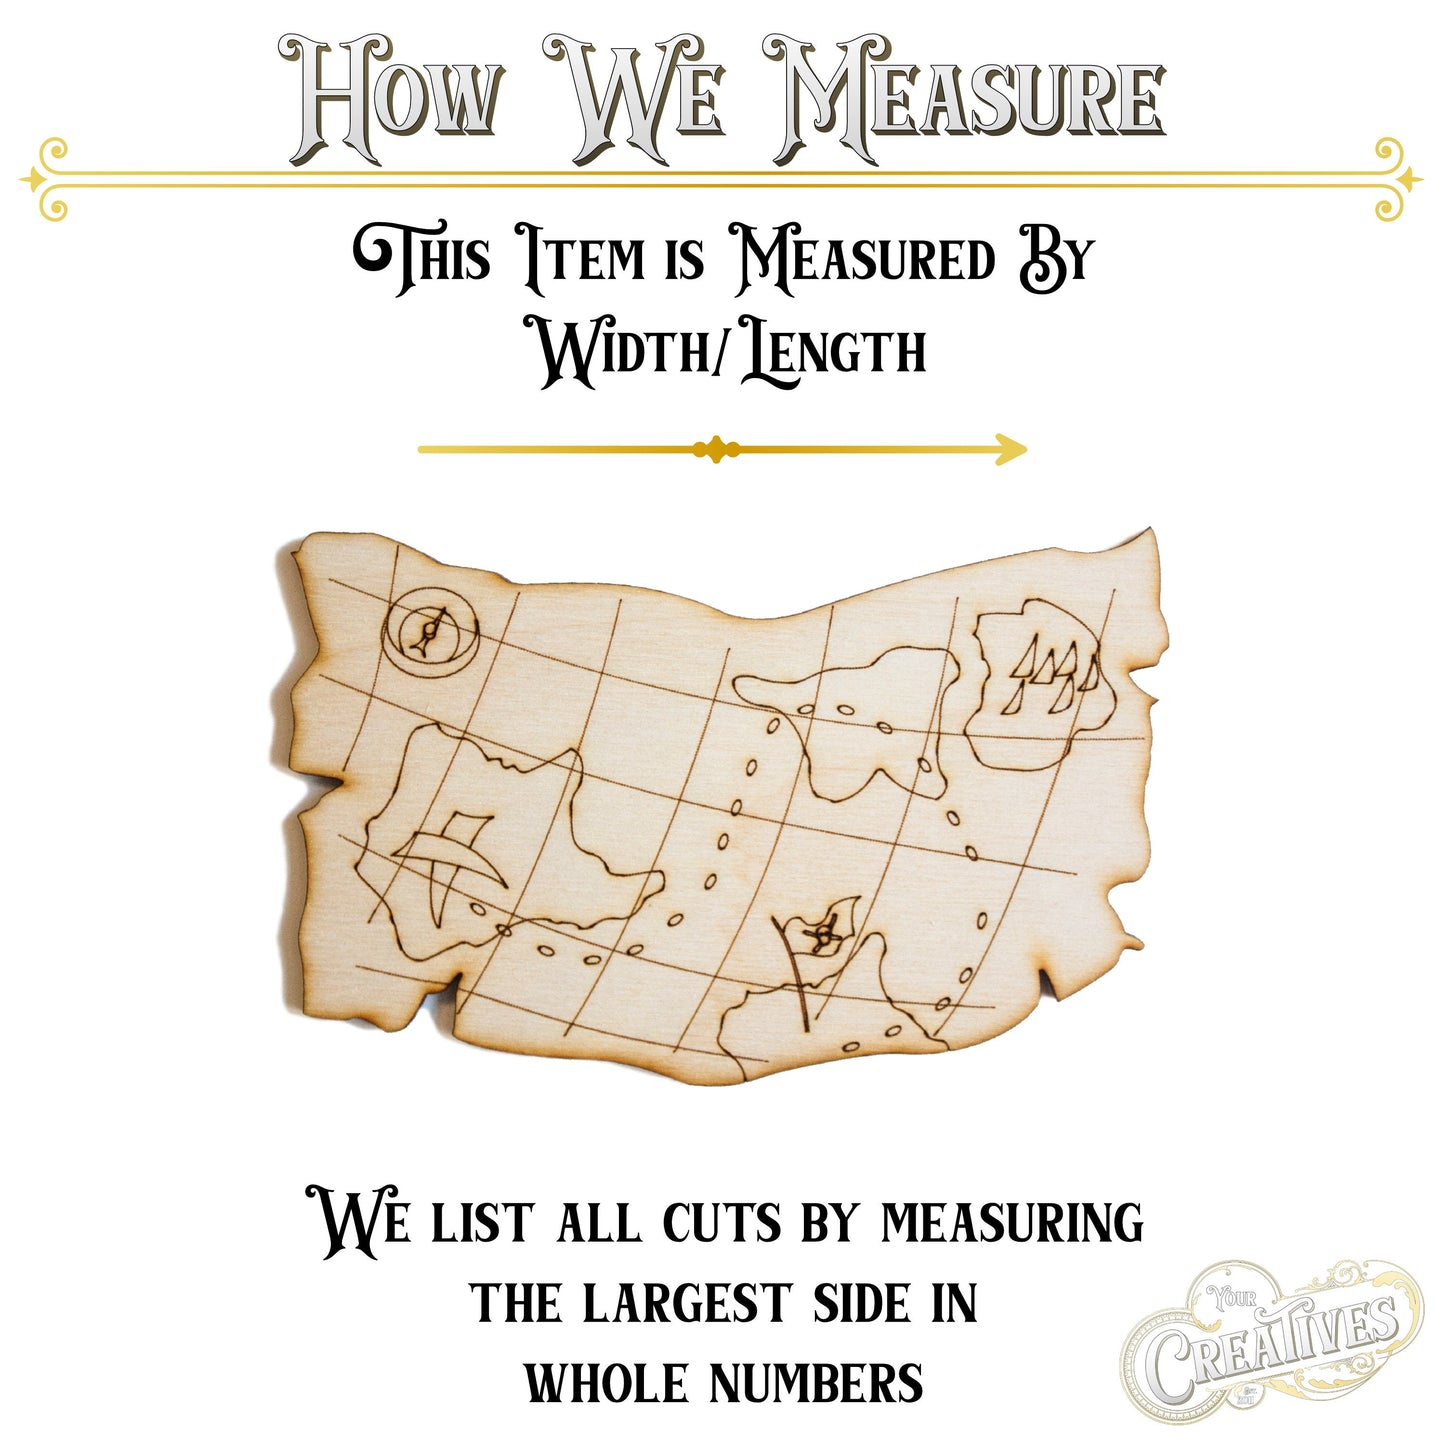 Treasure Map Wood Cutout-Pirate Theme Decor-Various Sizes-Wood Maps-DIY Crafts-Pirate Map-Pirate Party Crafts-Nautical Theme Decor-Discovery